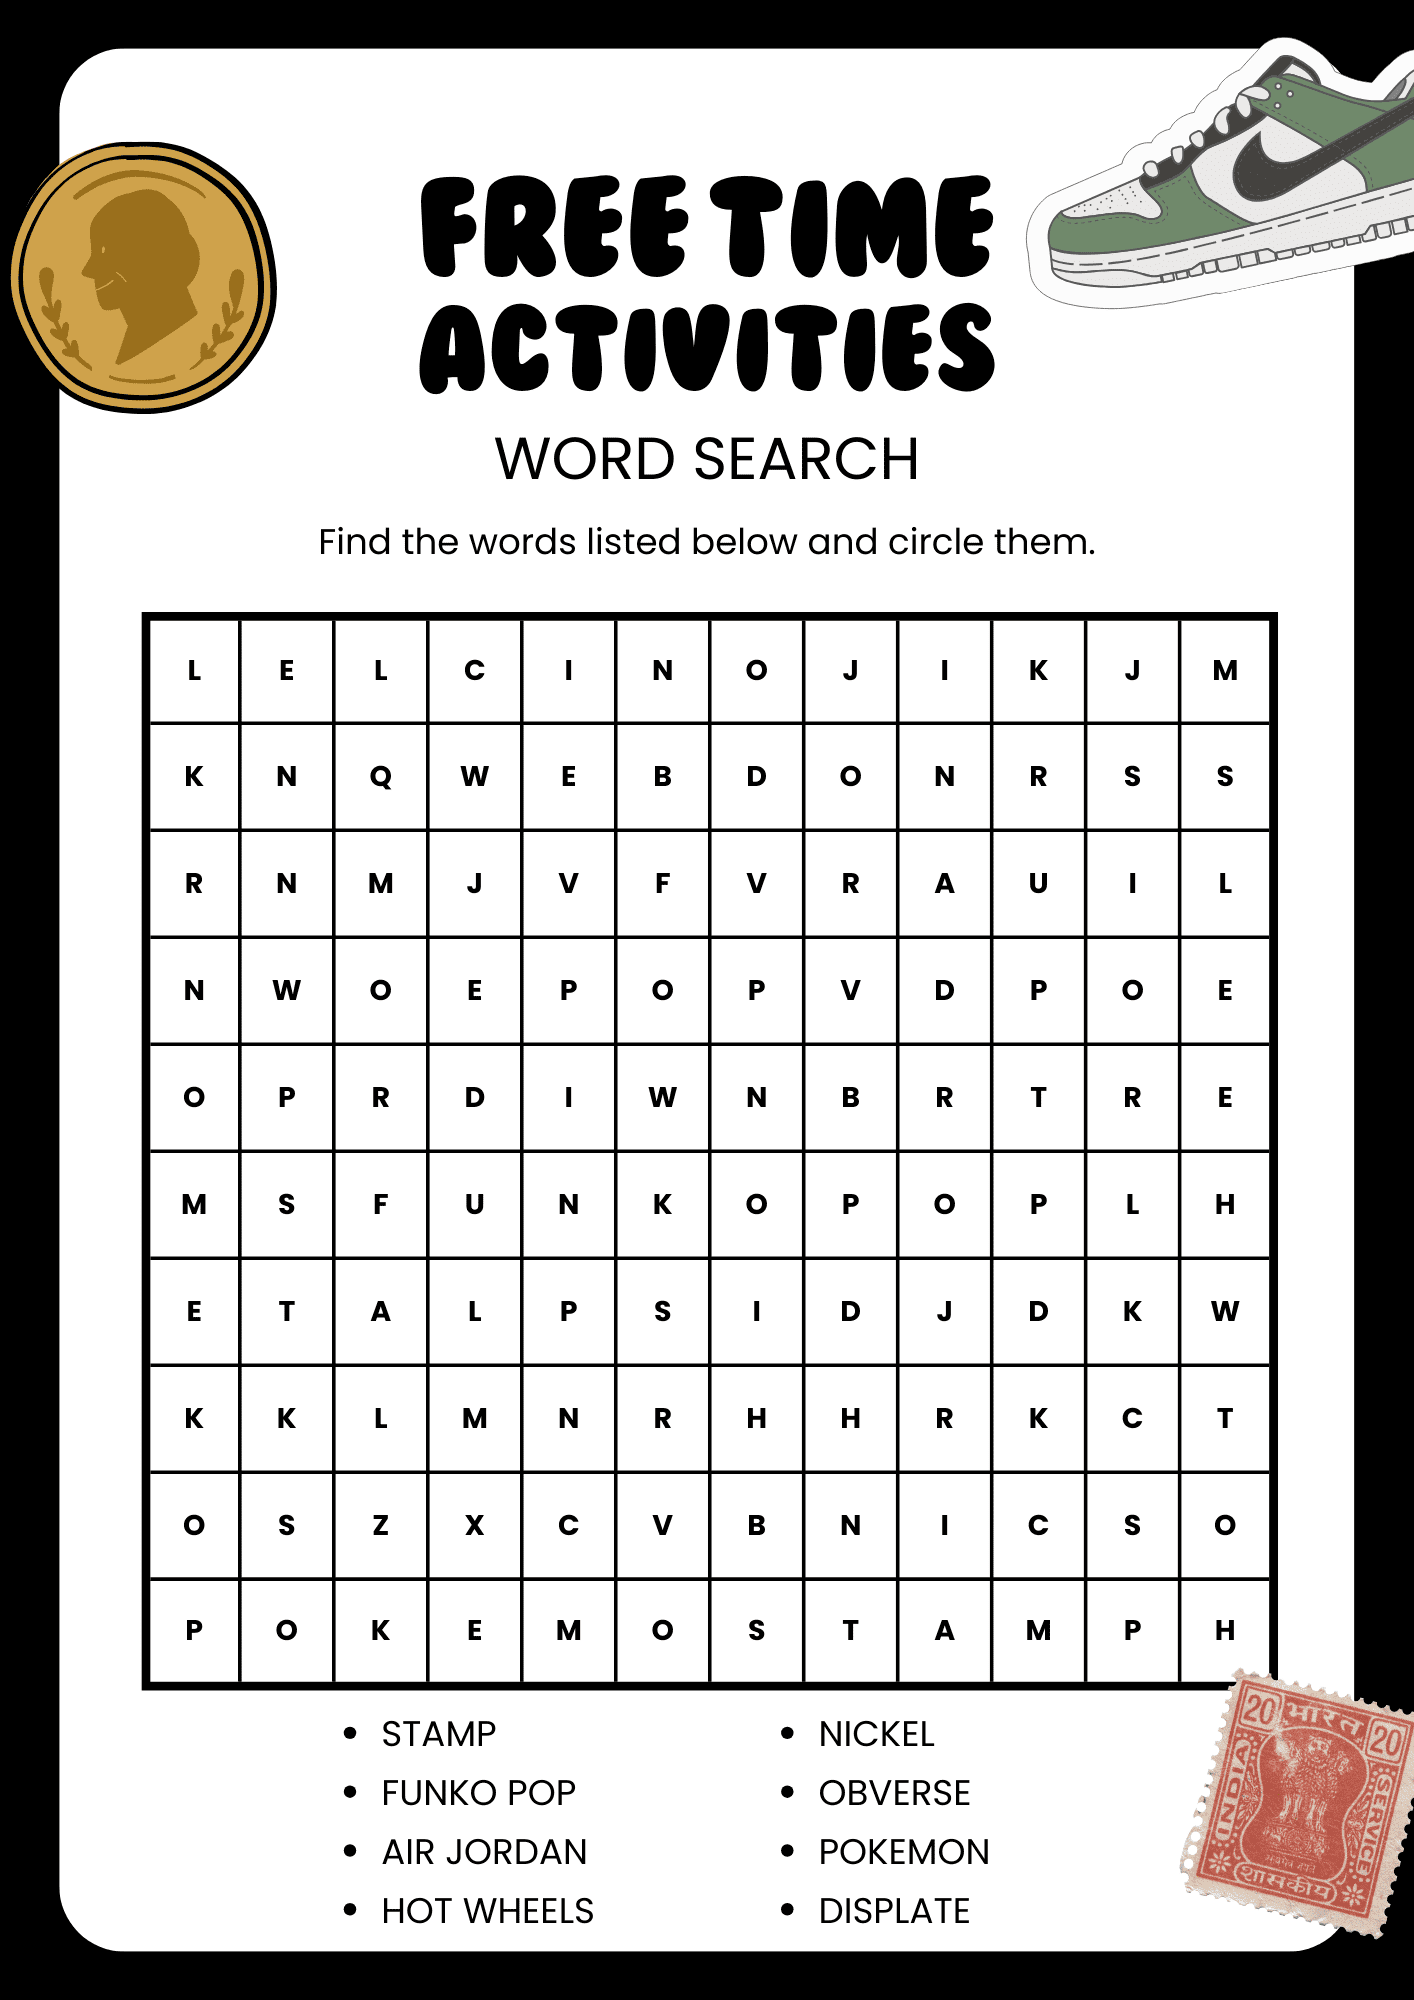 Free Time Activities Hobbies and Interests Word Search 1